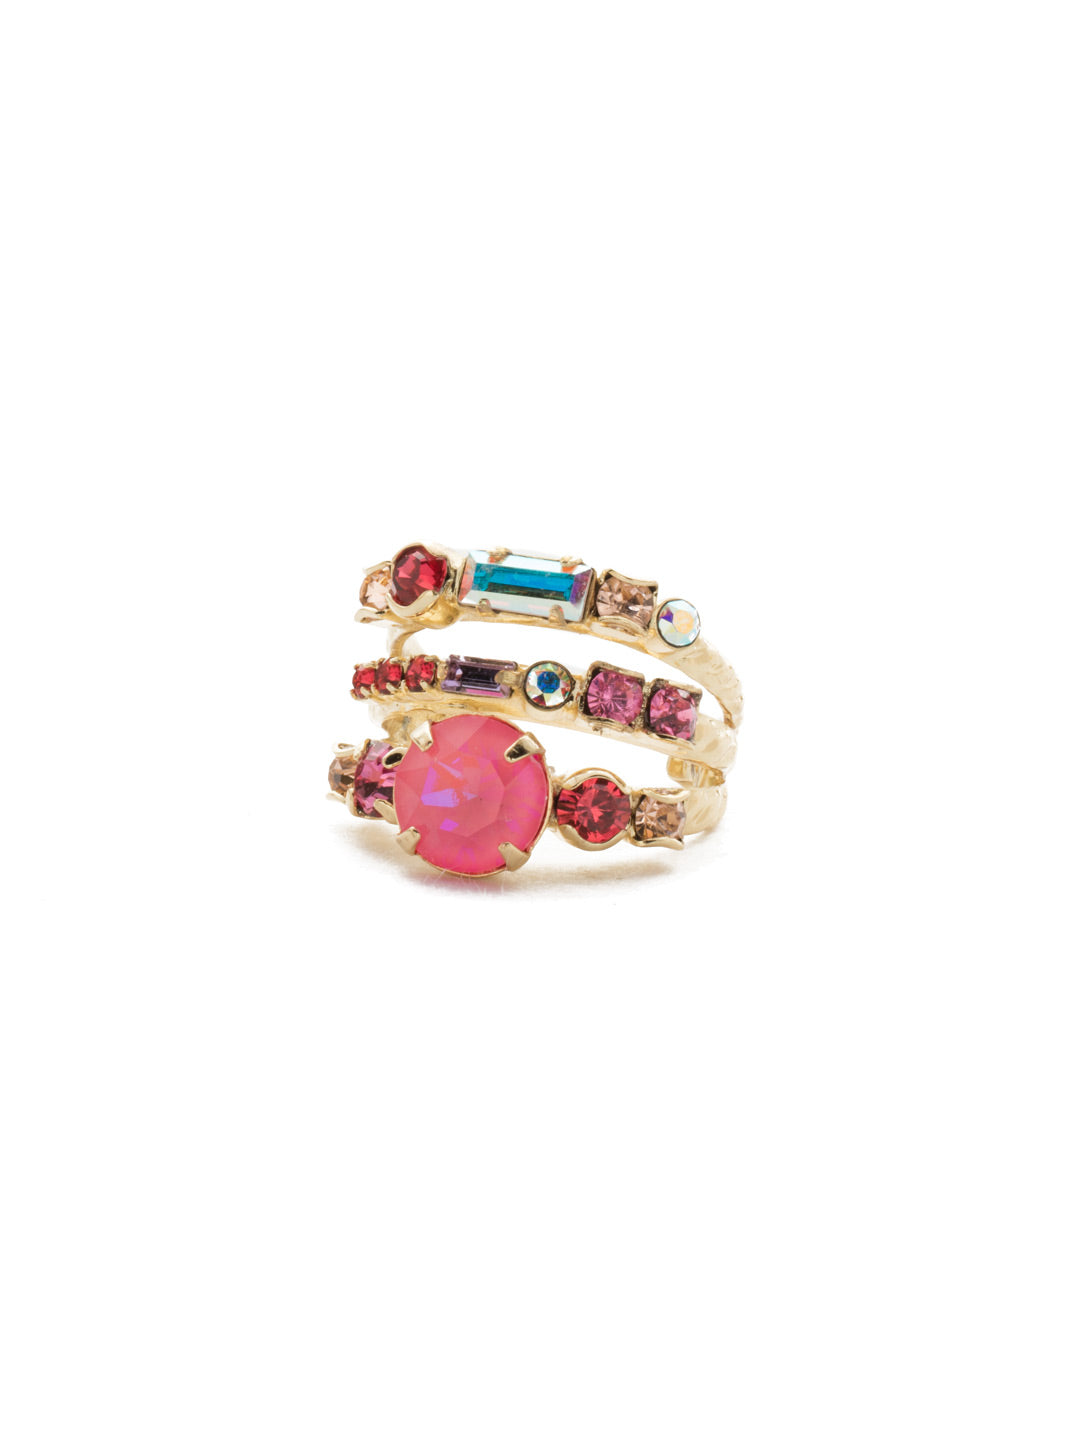 Triple Threat Stacked Ring - RDK23BGISS - <p>Three rows of crystal encrusted bands are joined together for a stacked, stylish look. From Sorrelli's Island Sun collection in our Bright Gold-tone finish.</p>